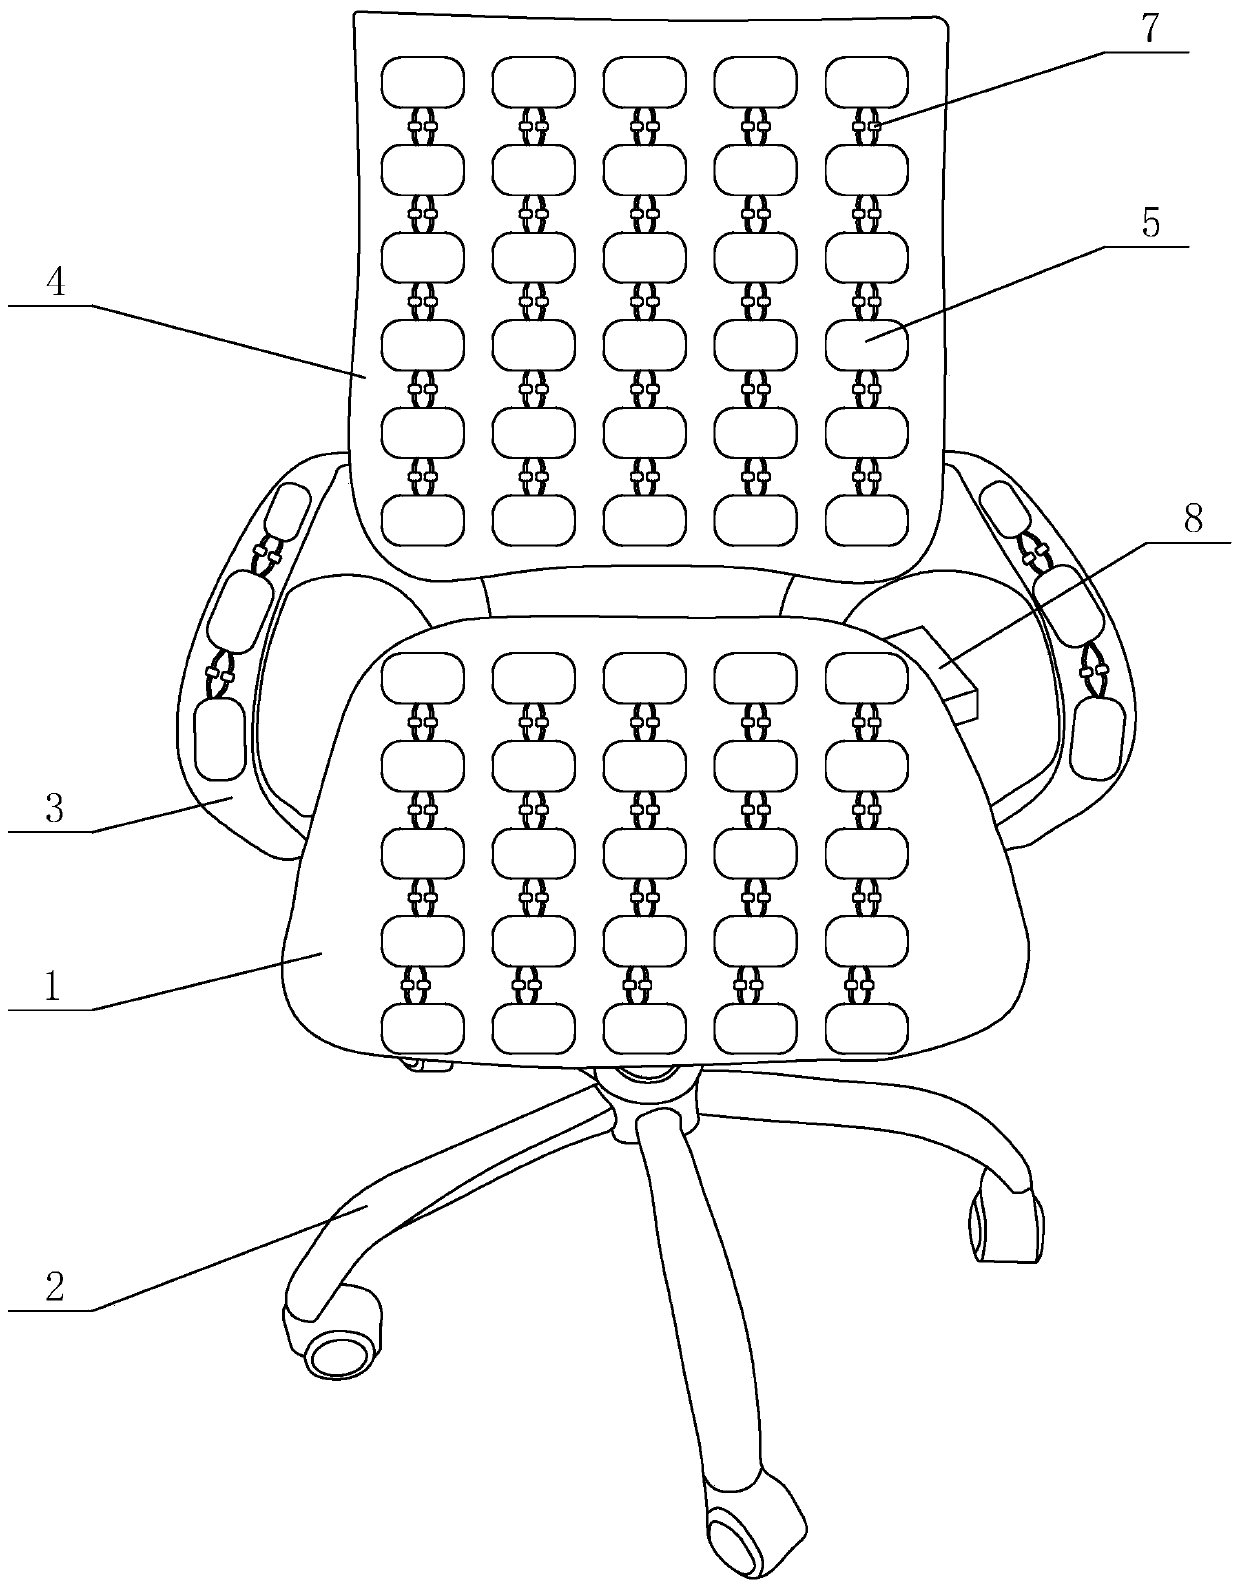 Chair capable of intelligently adjusting sitting posture